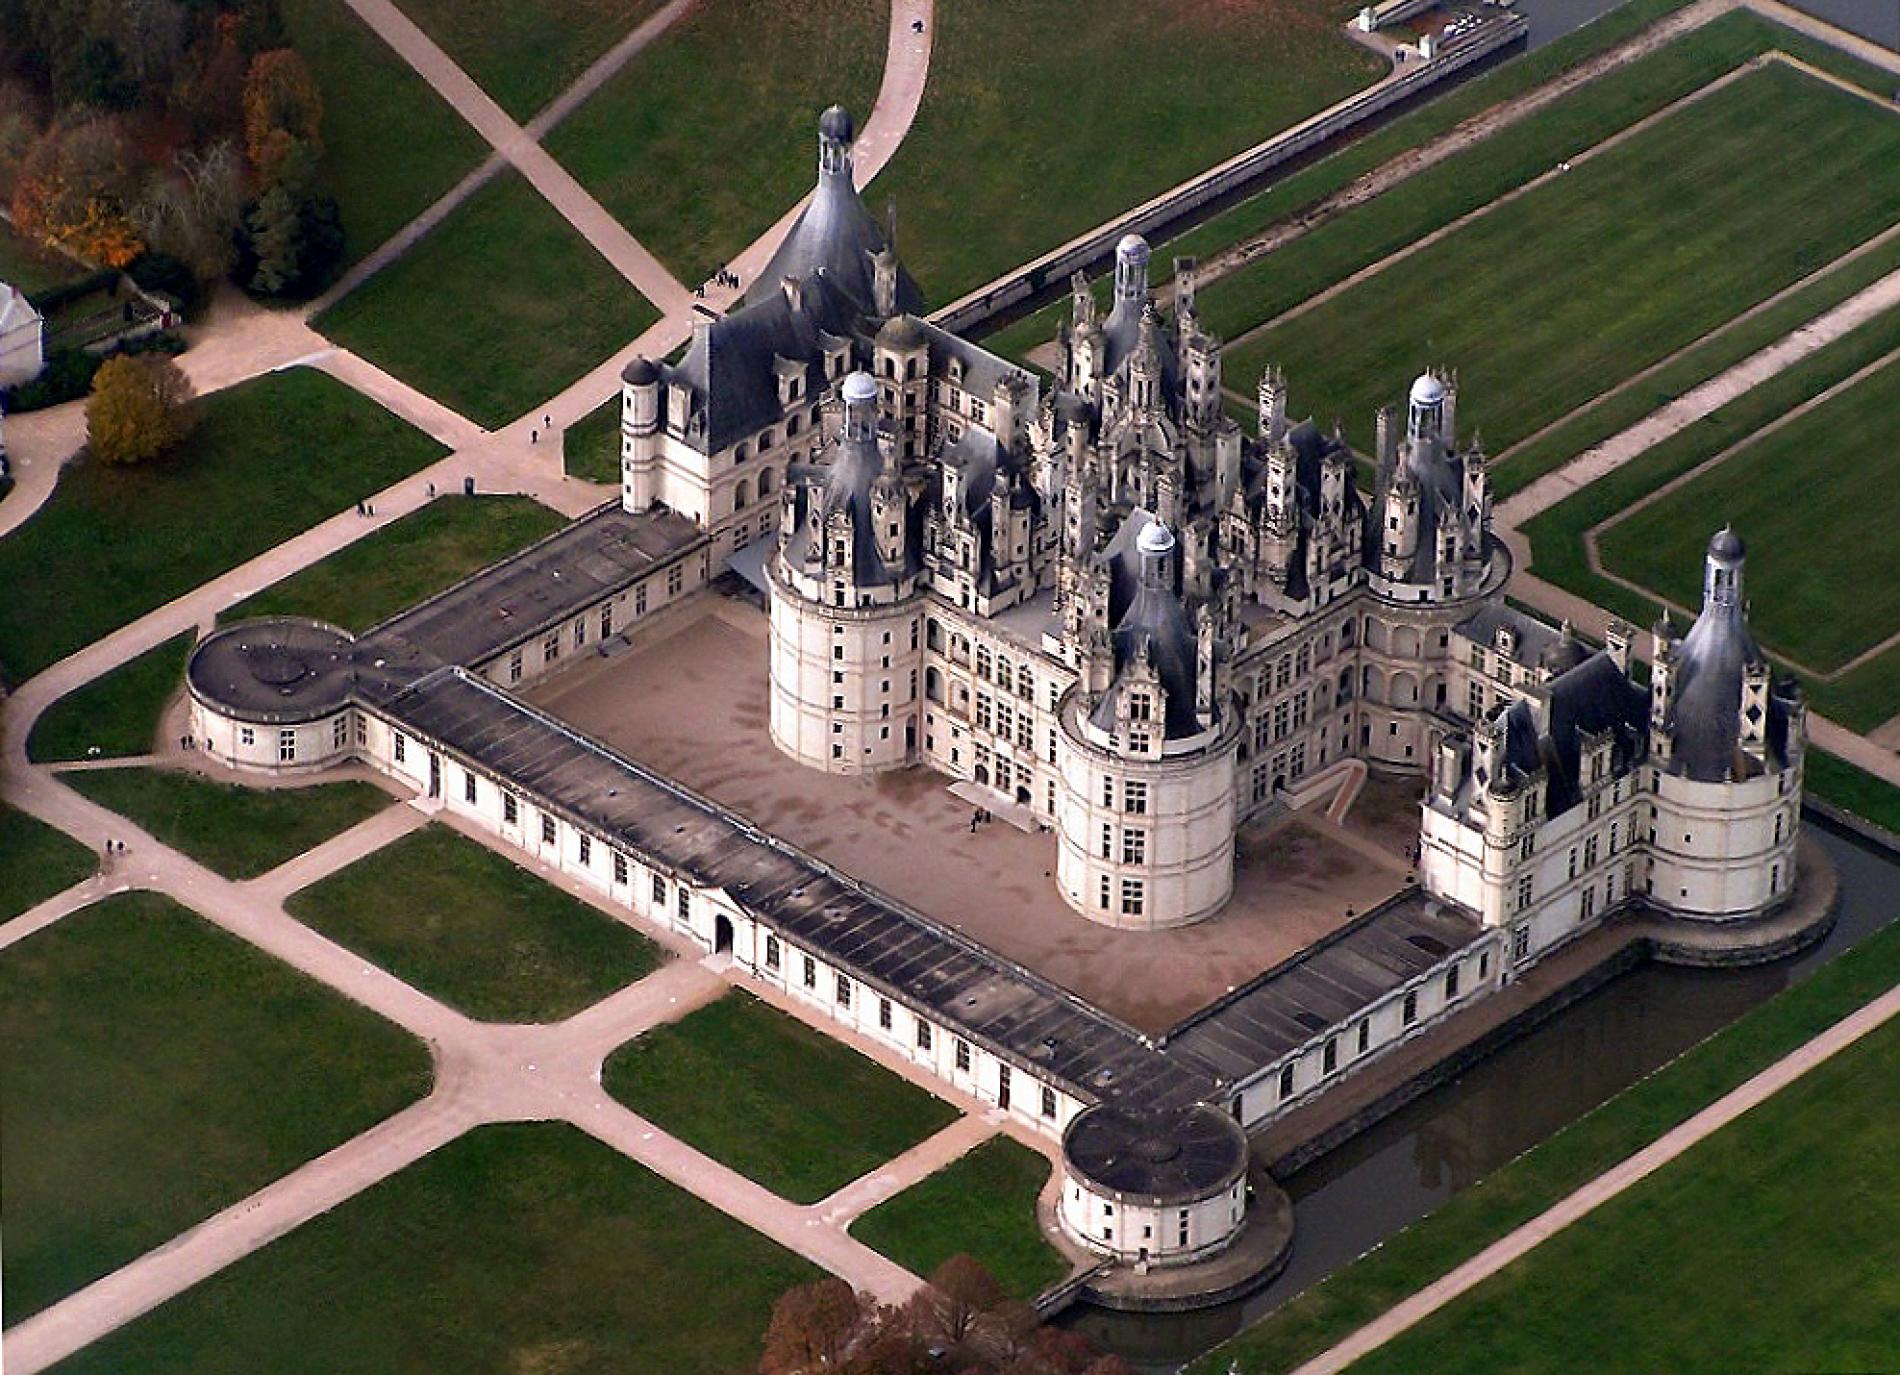 The castle of Chambord